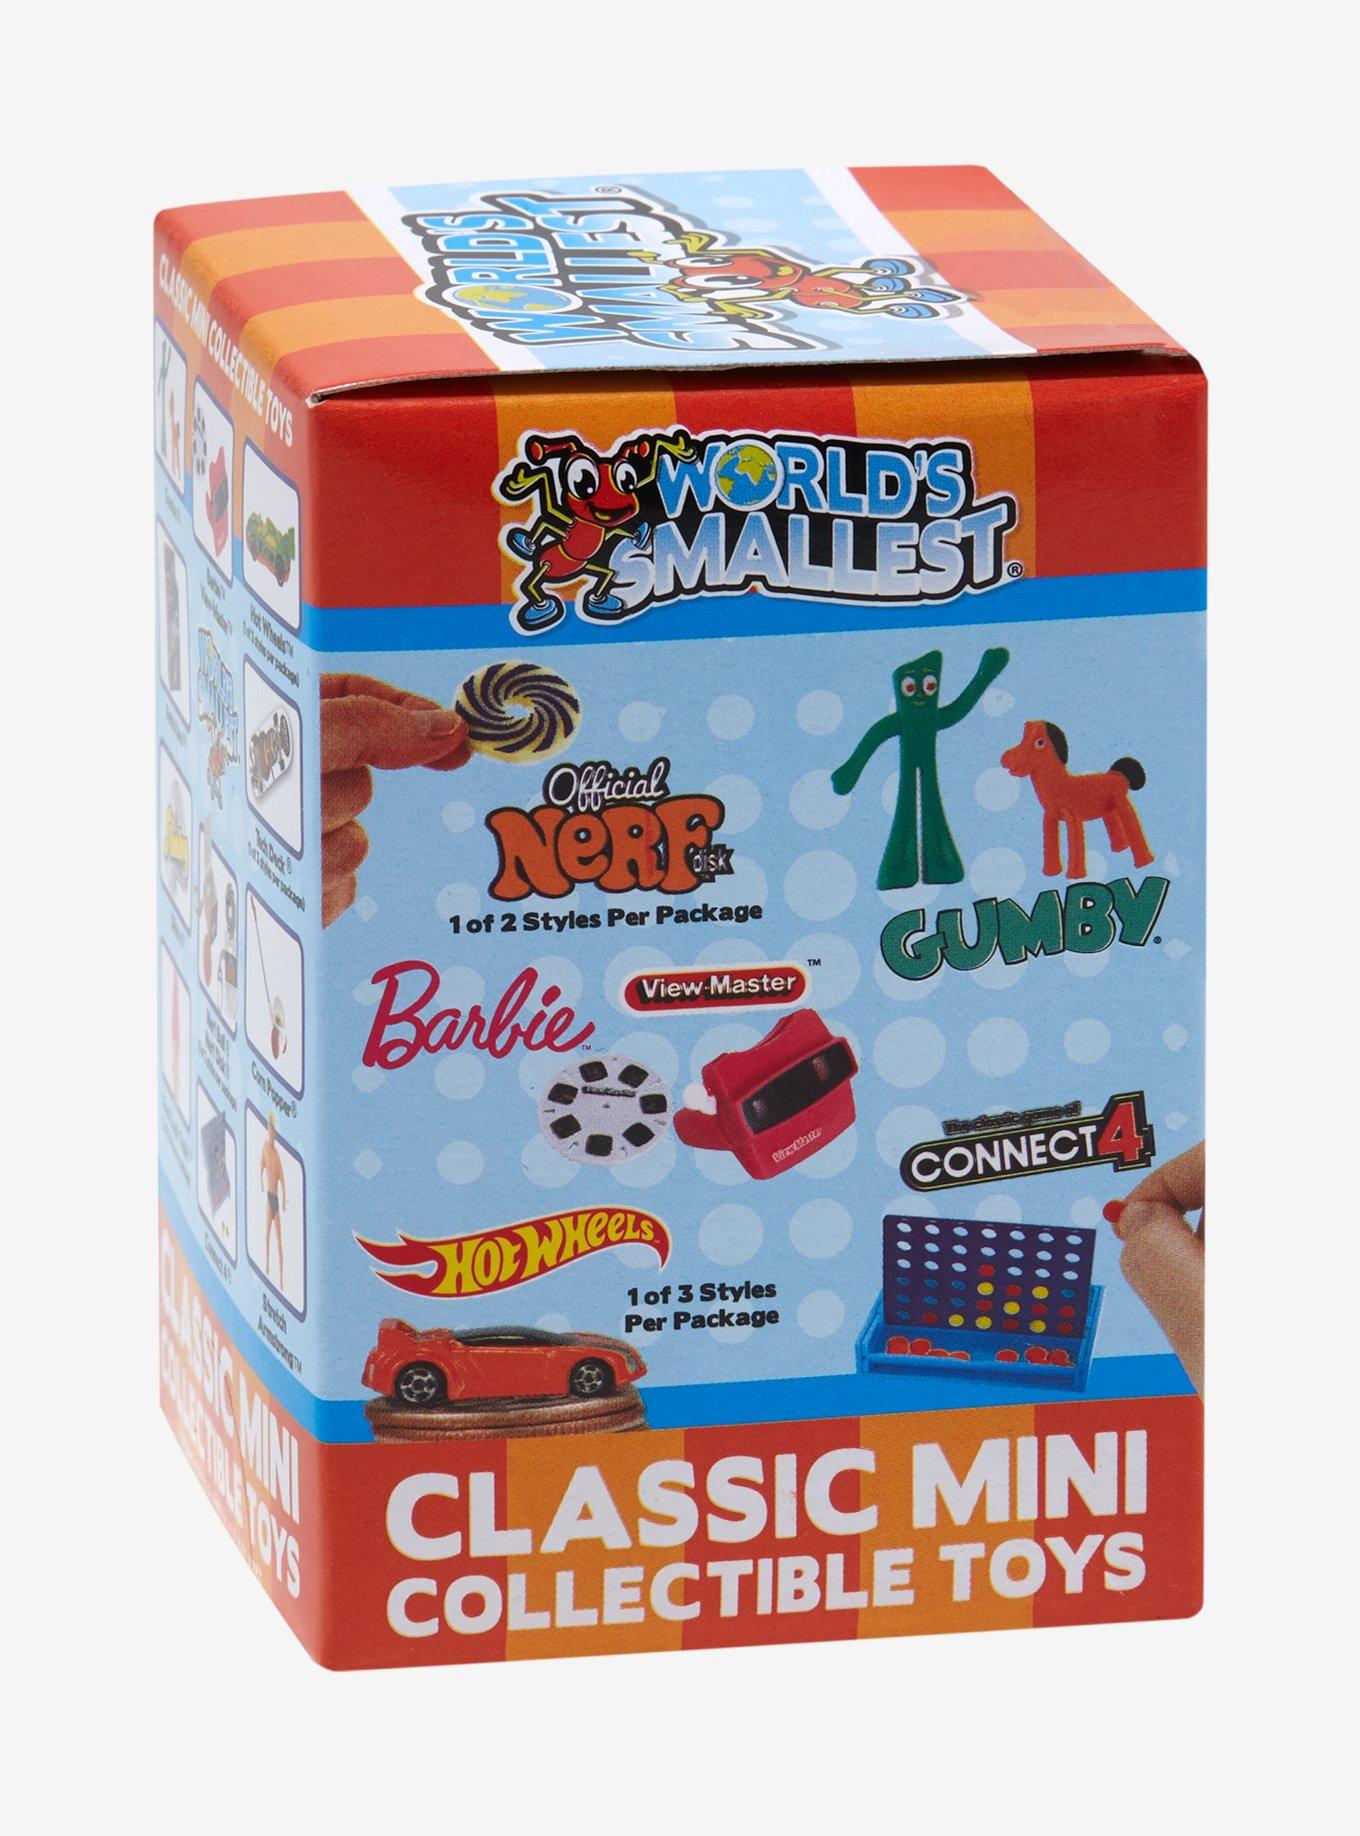 World's Smallest Micro Toy Box Series 1 Mystery Pack